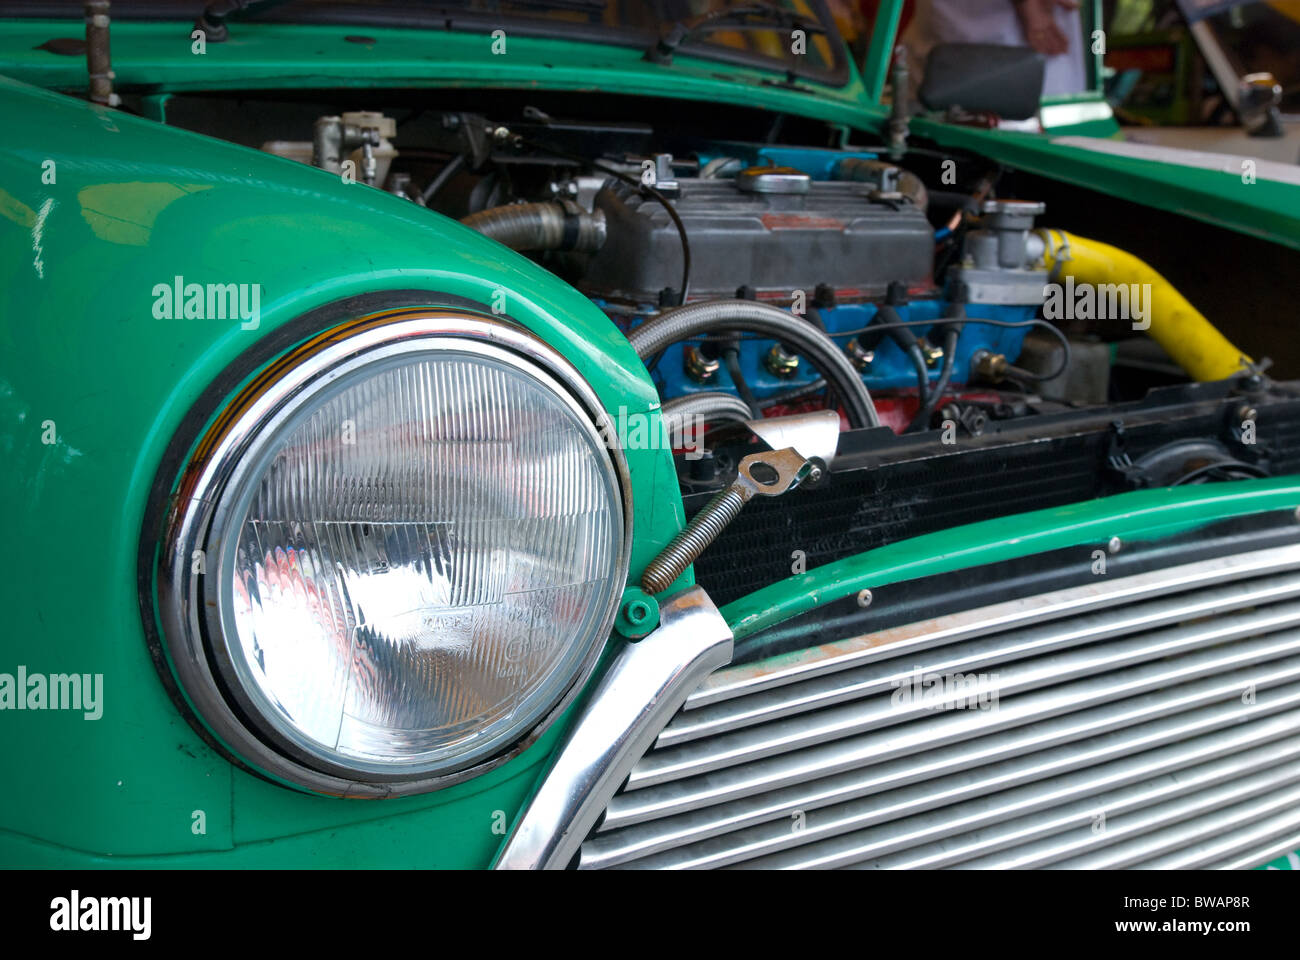 Front detail and engine of classic compact car from the sixties. Stock Photo